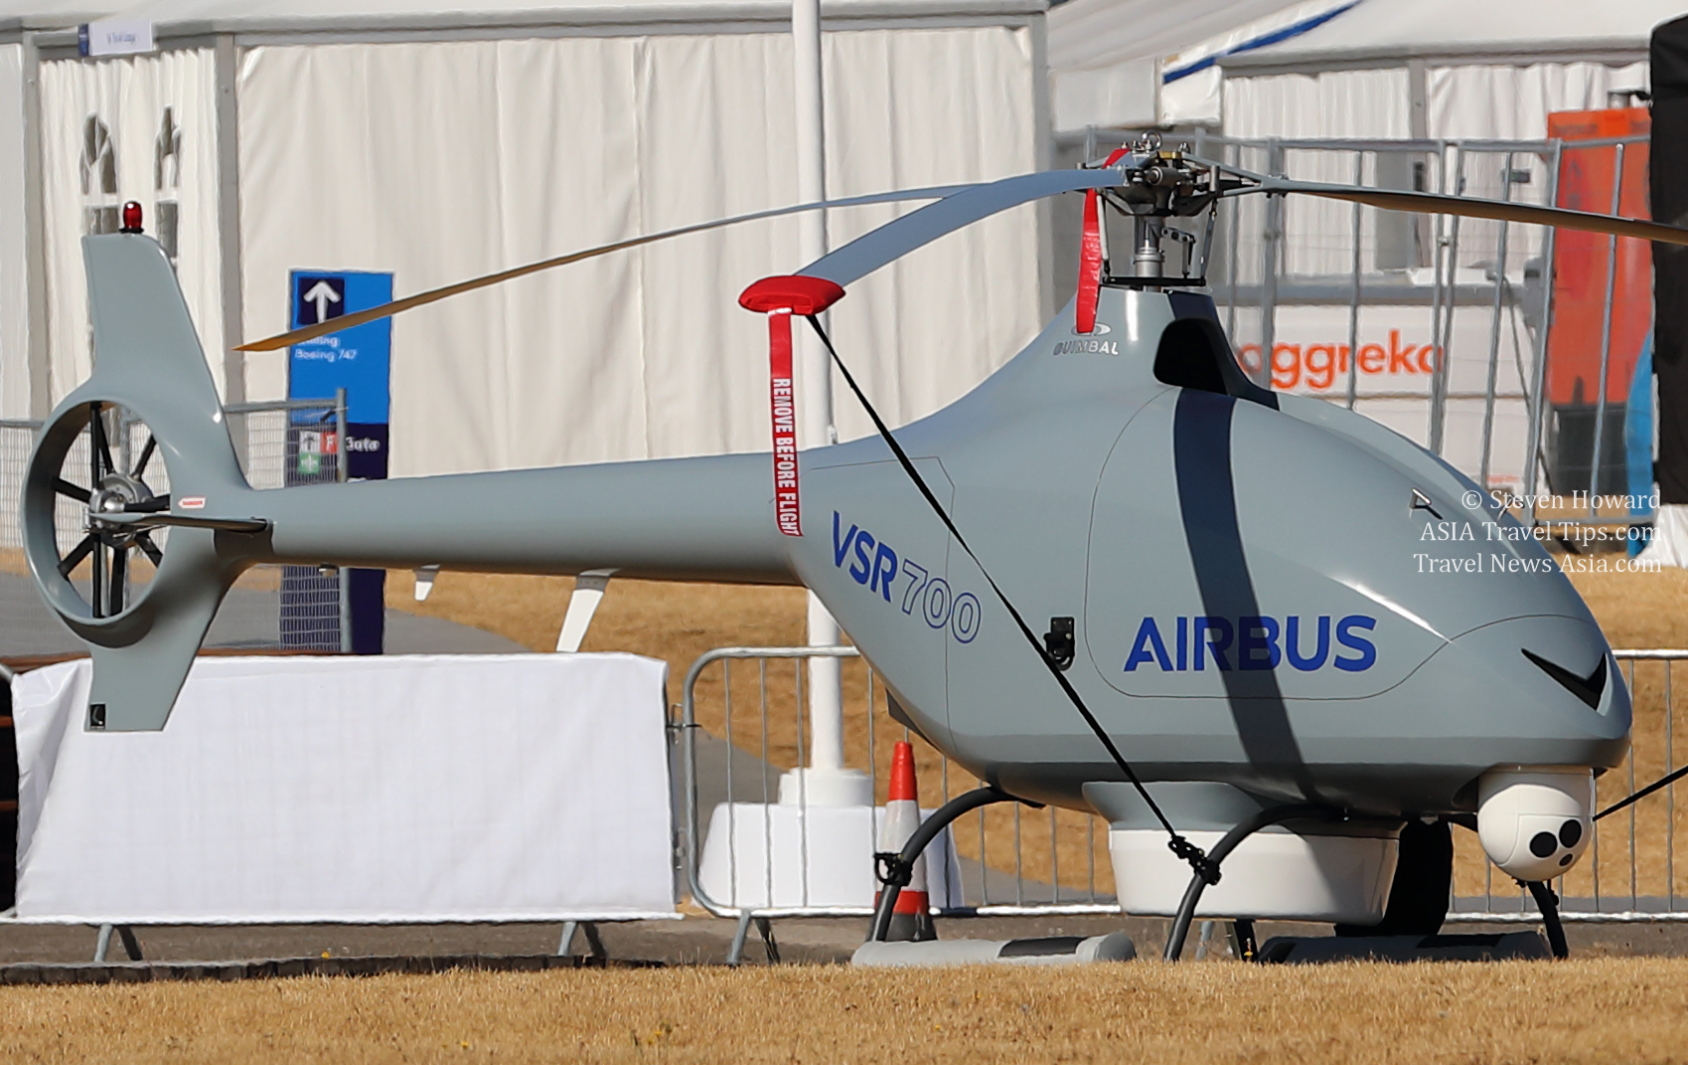 Airbus Helicopters' VSR700 unmanned aerial system (UAS). Picture by Steven Howard of TravelNewsAsia.com Click to enlarge.